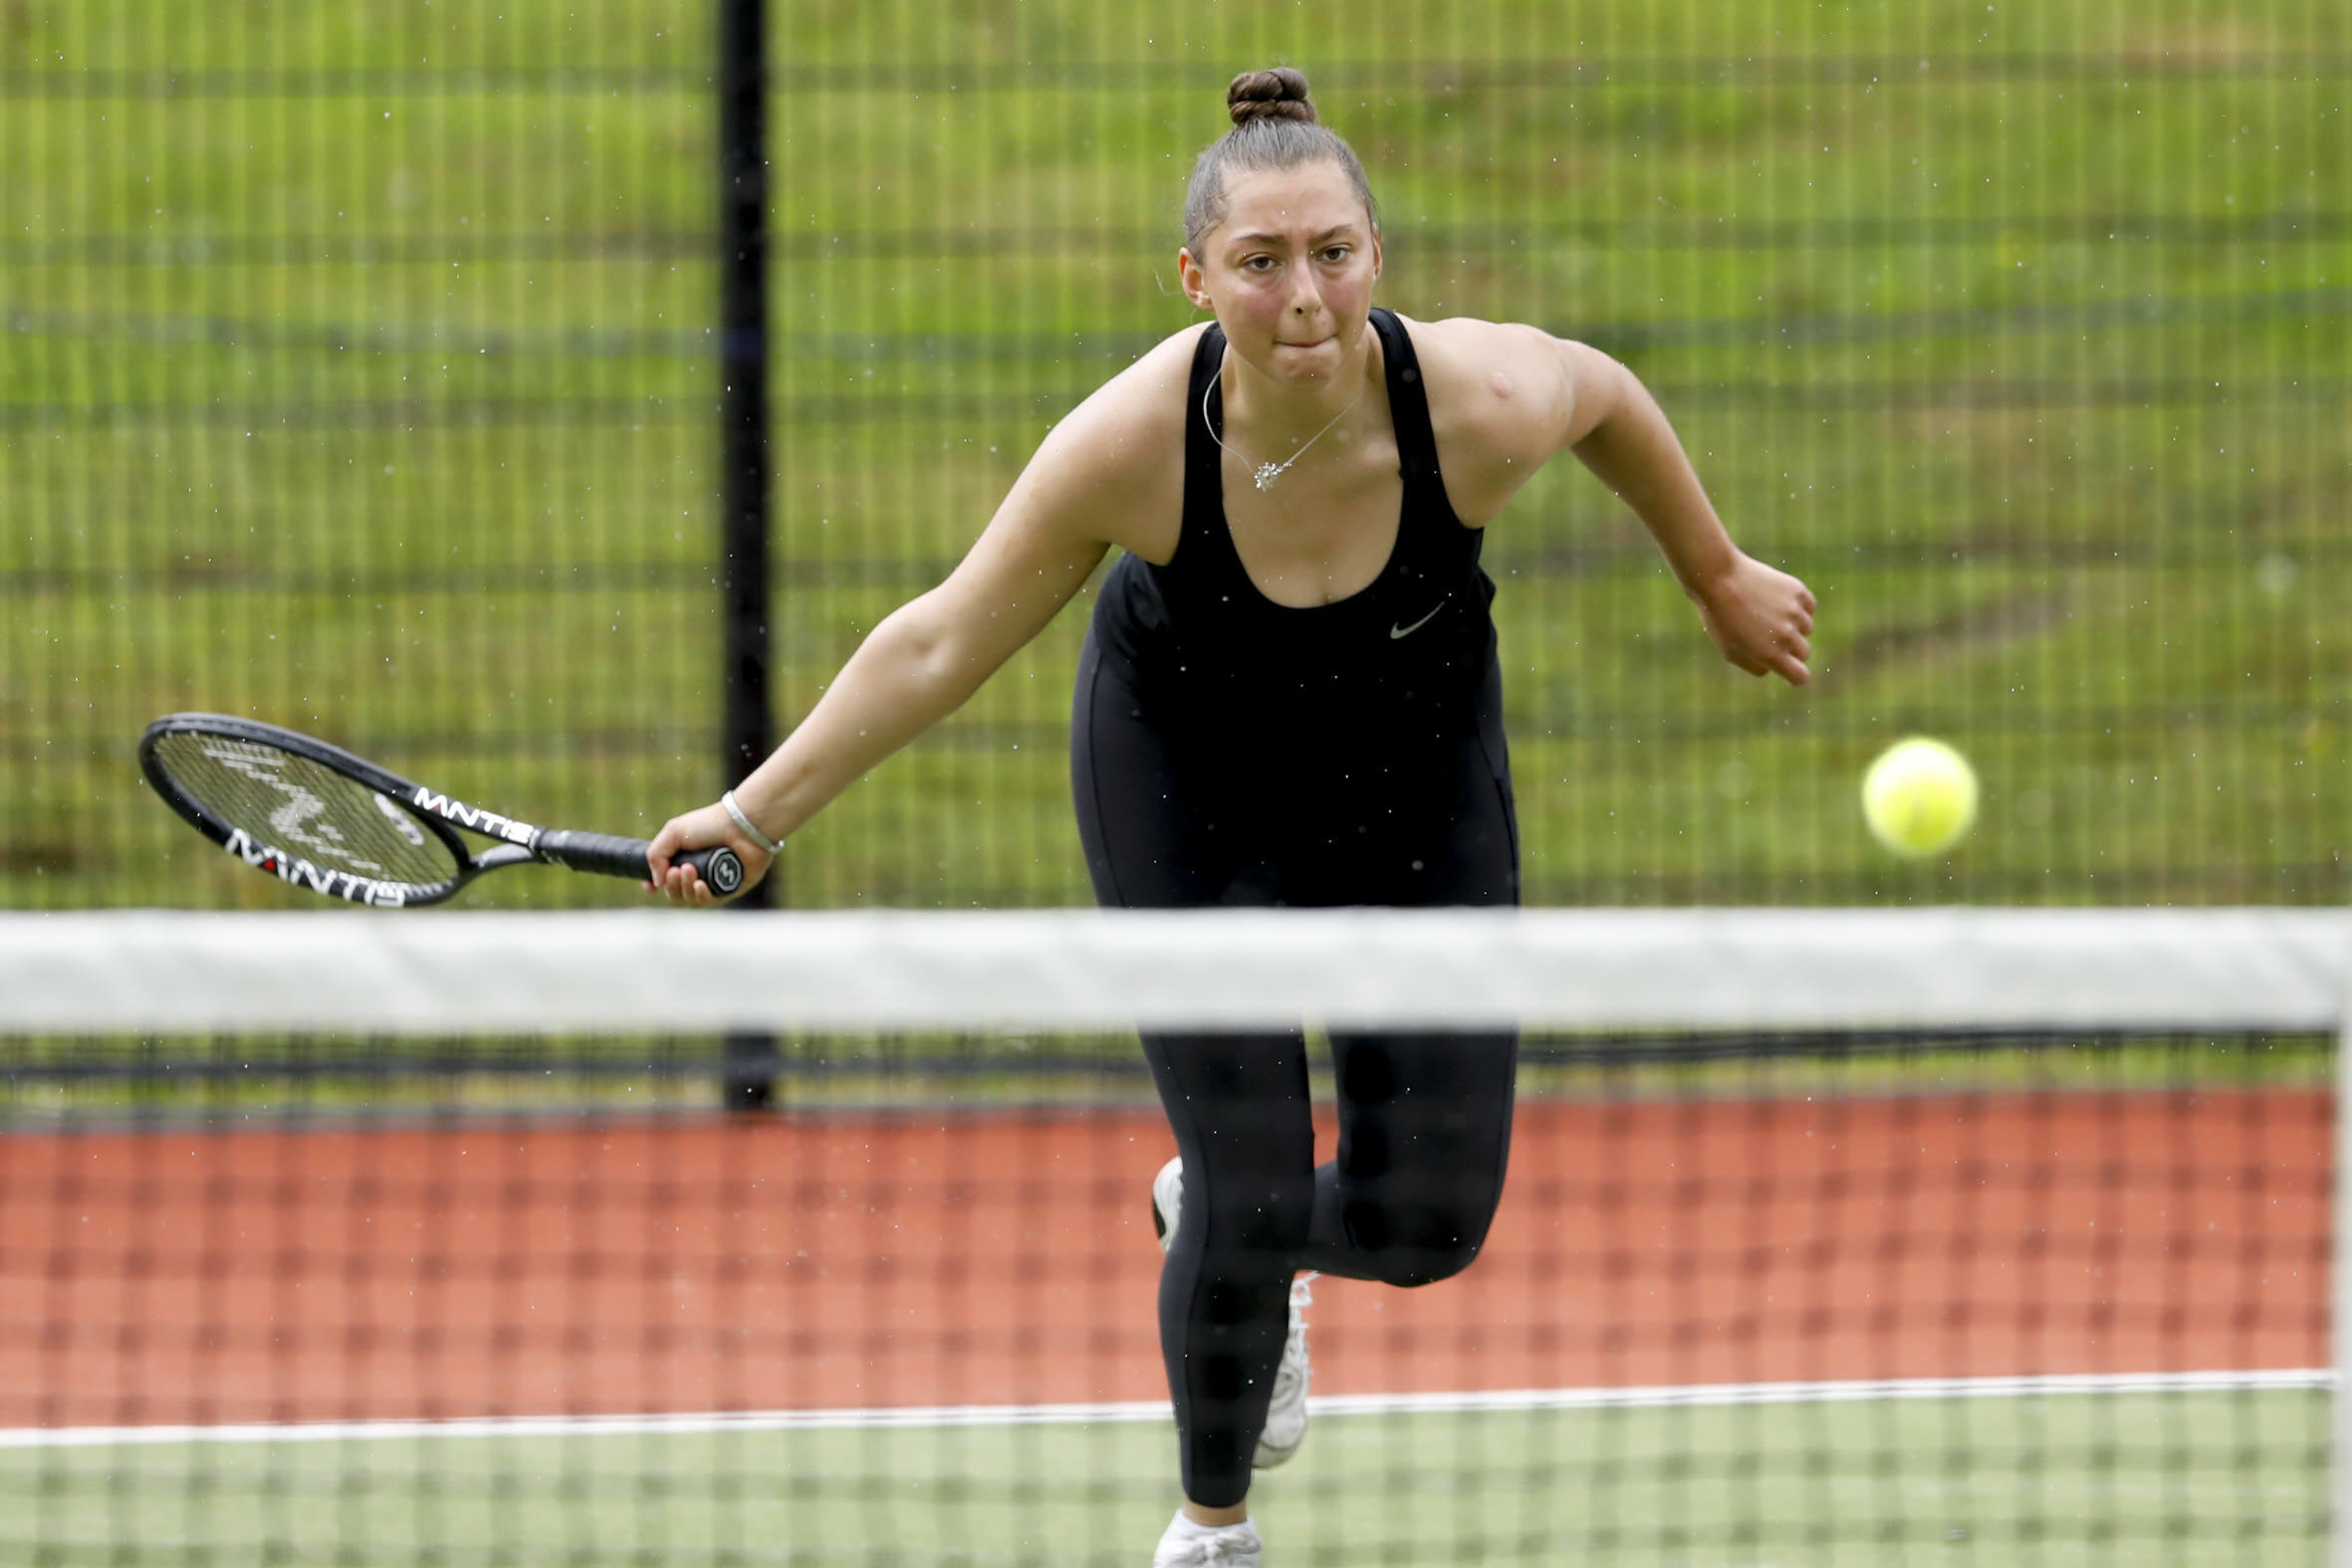 Fermanagh Open: Local successes served up amid top tennis